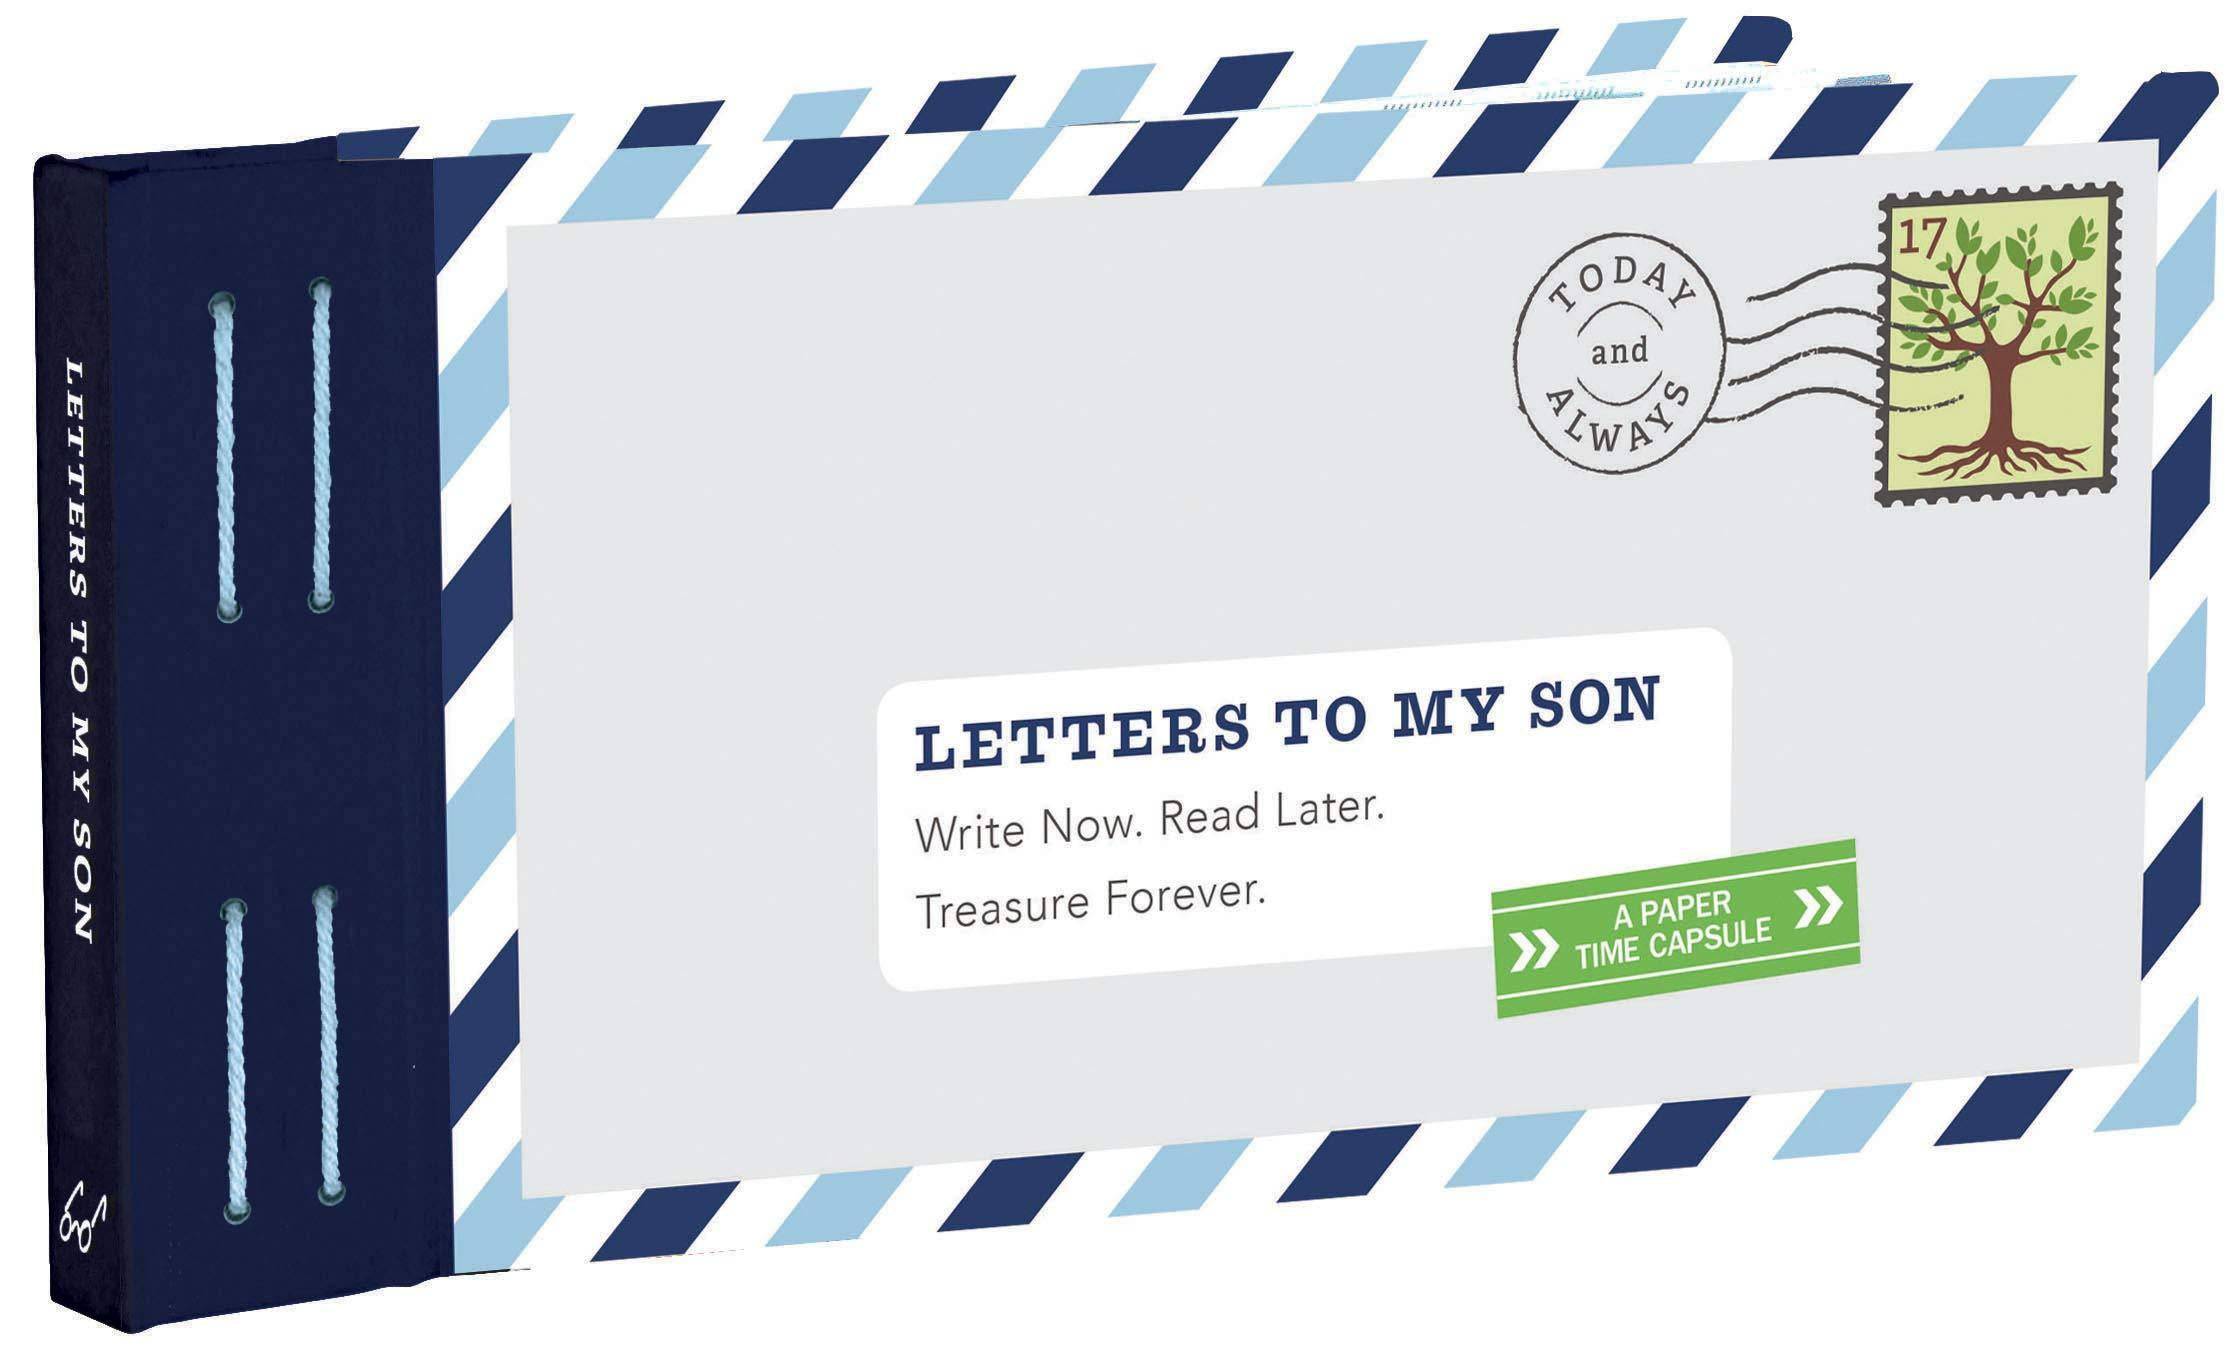 Letters To My Son - SureShot Books Publishing LLC